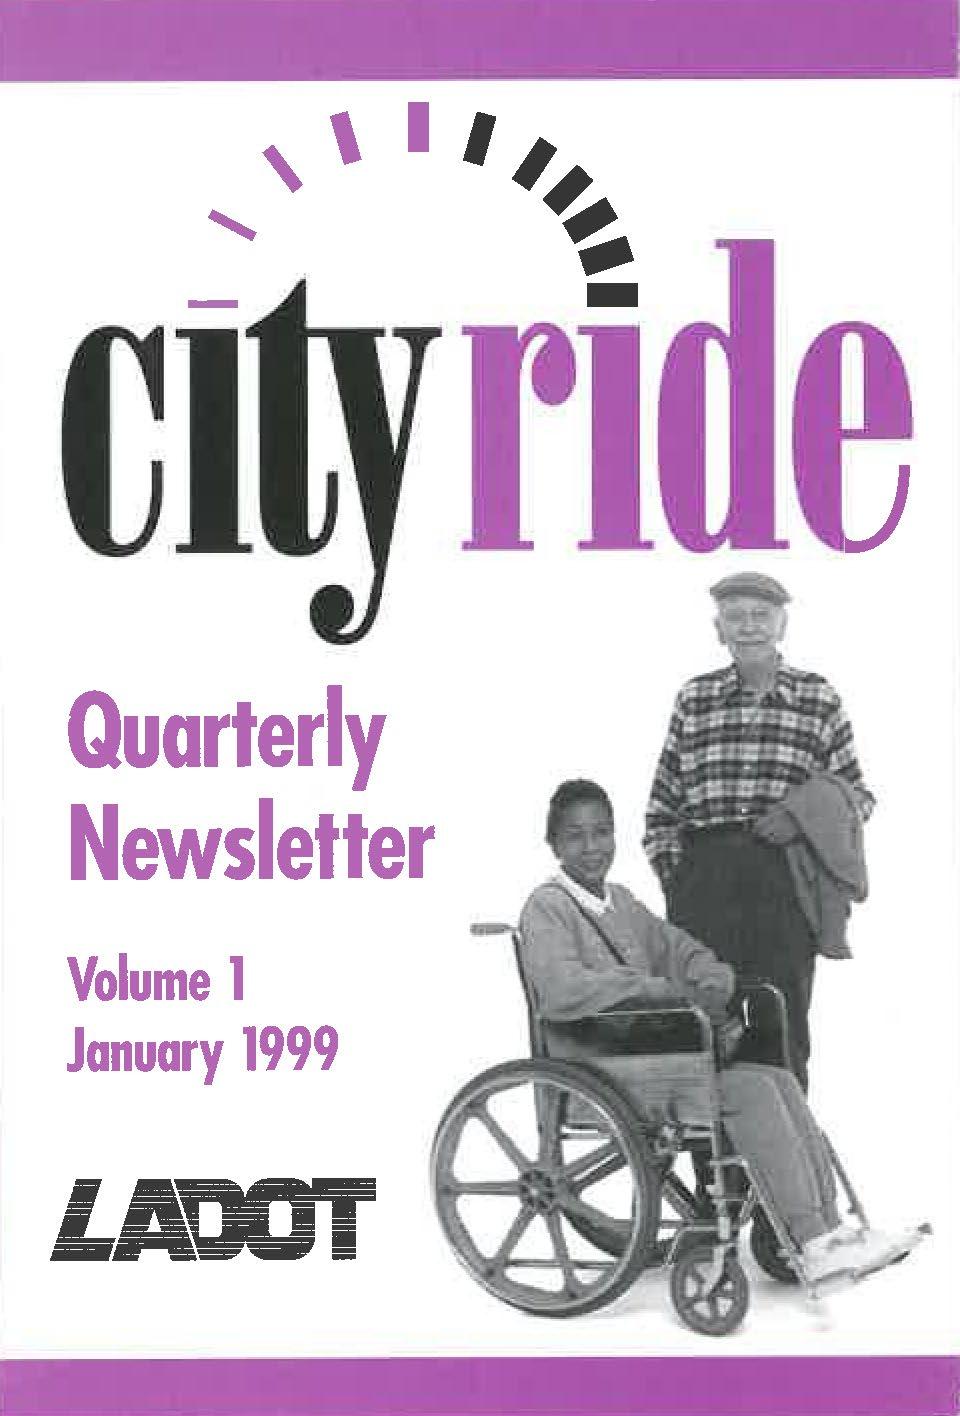 Taxi voucher Cityride is now the